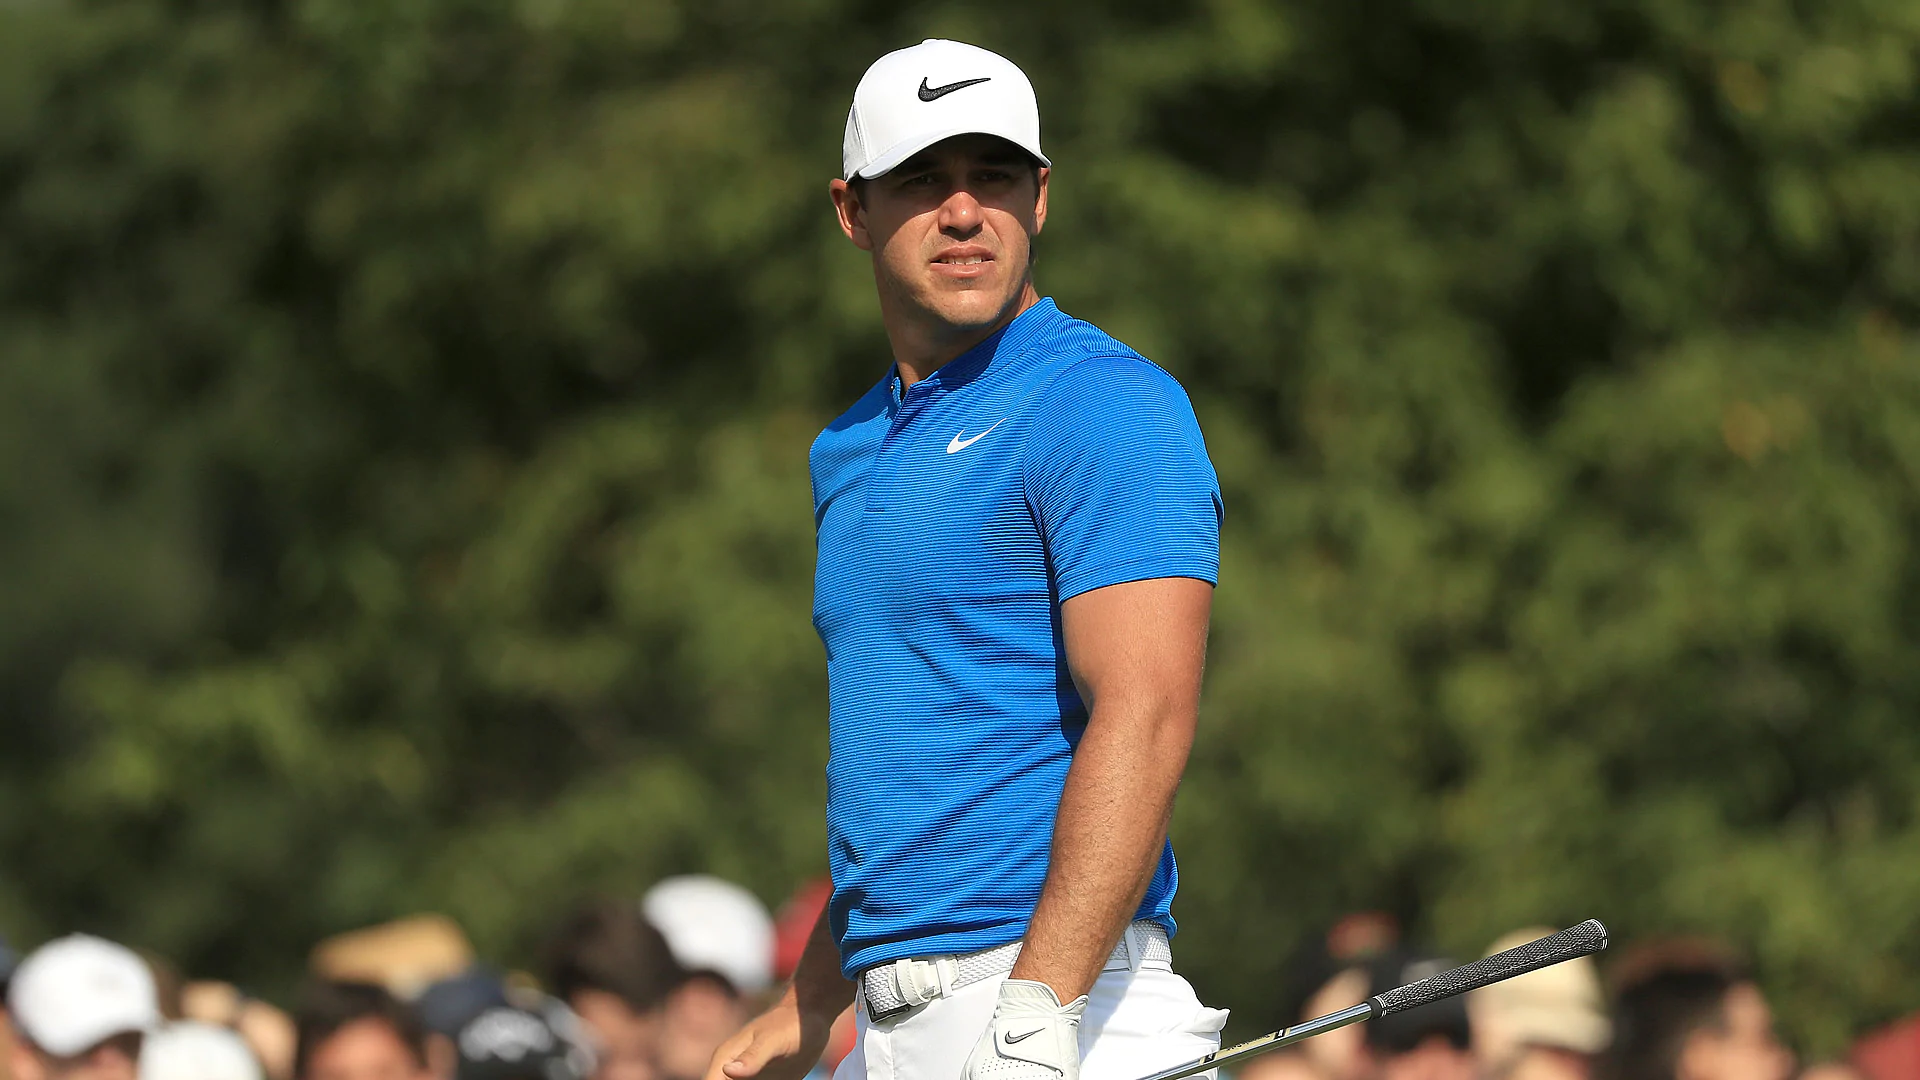 Koepka fires 68 at U.S. Open-like Quail Hollow